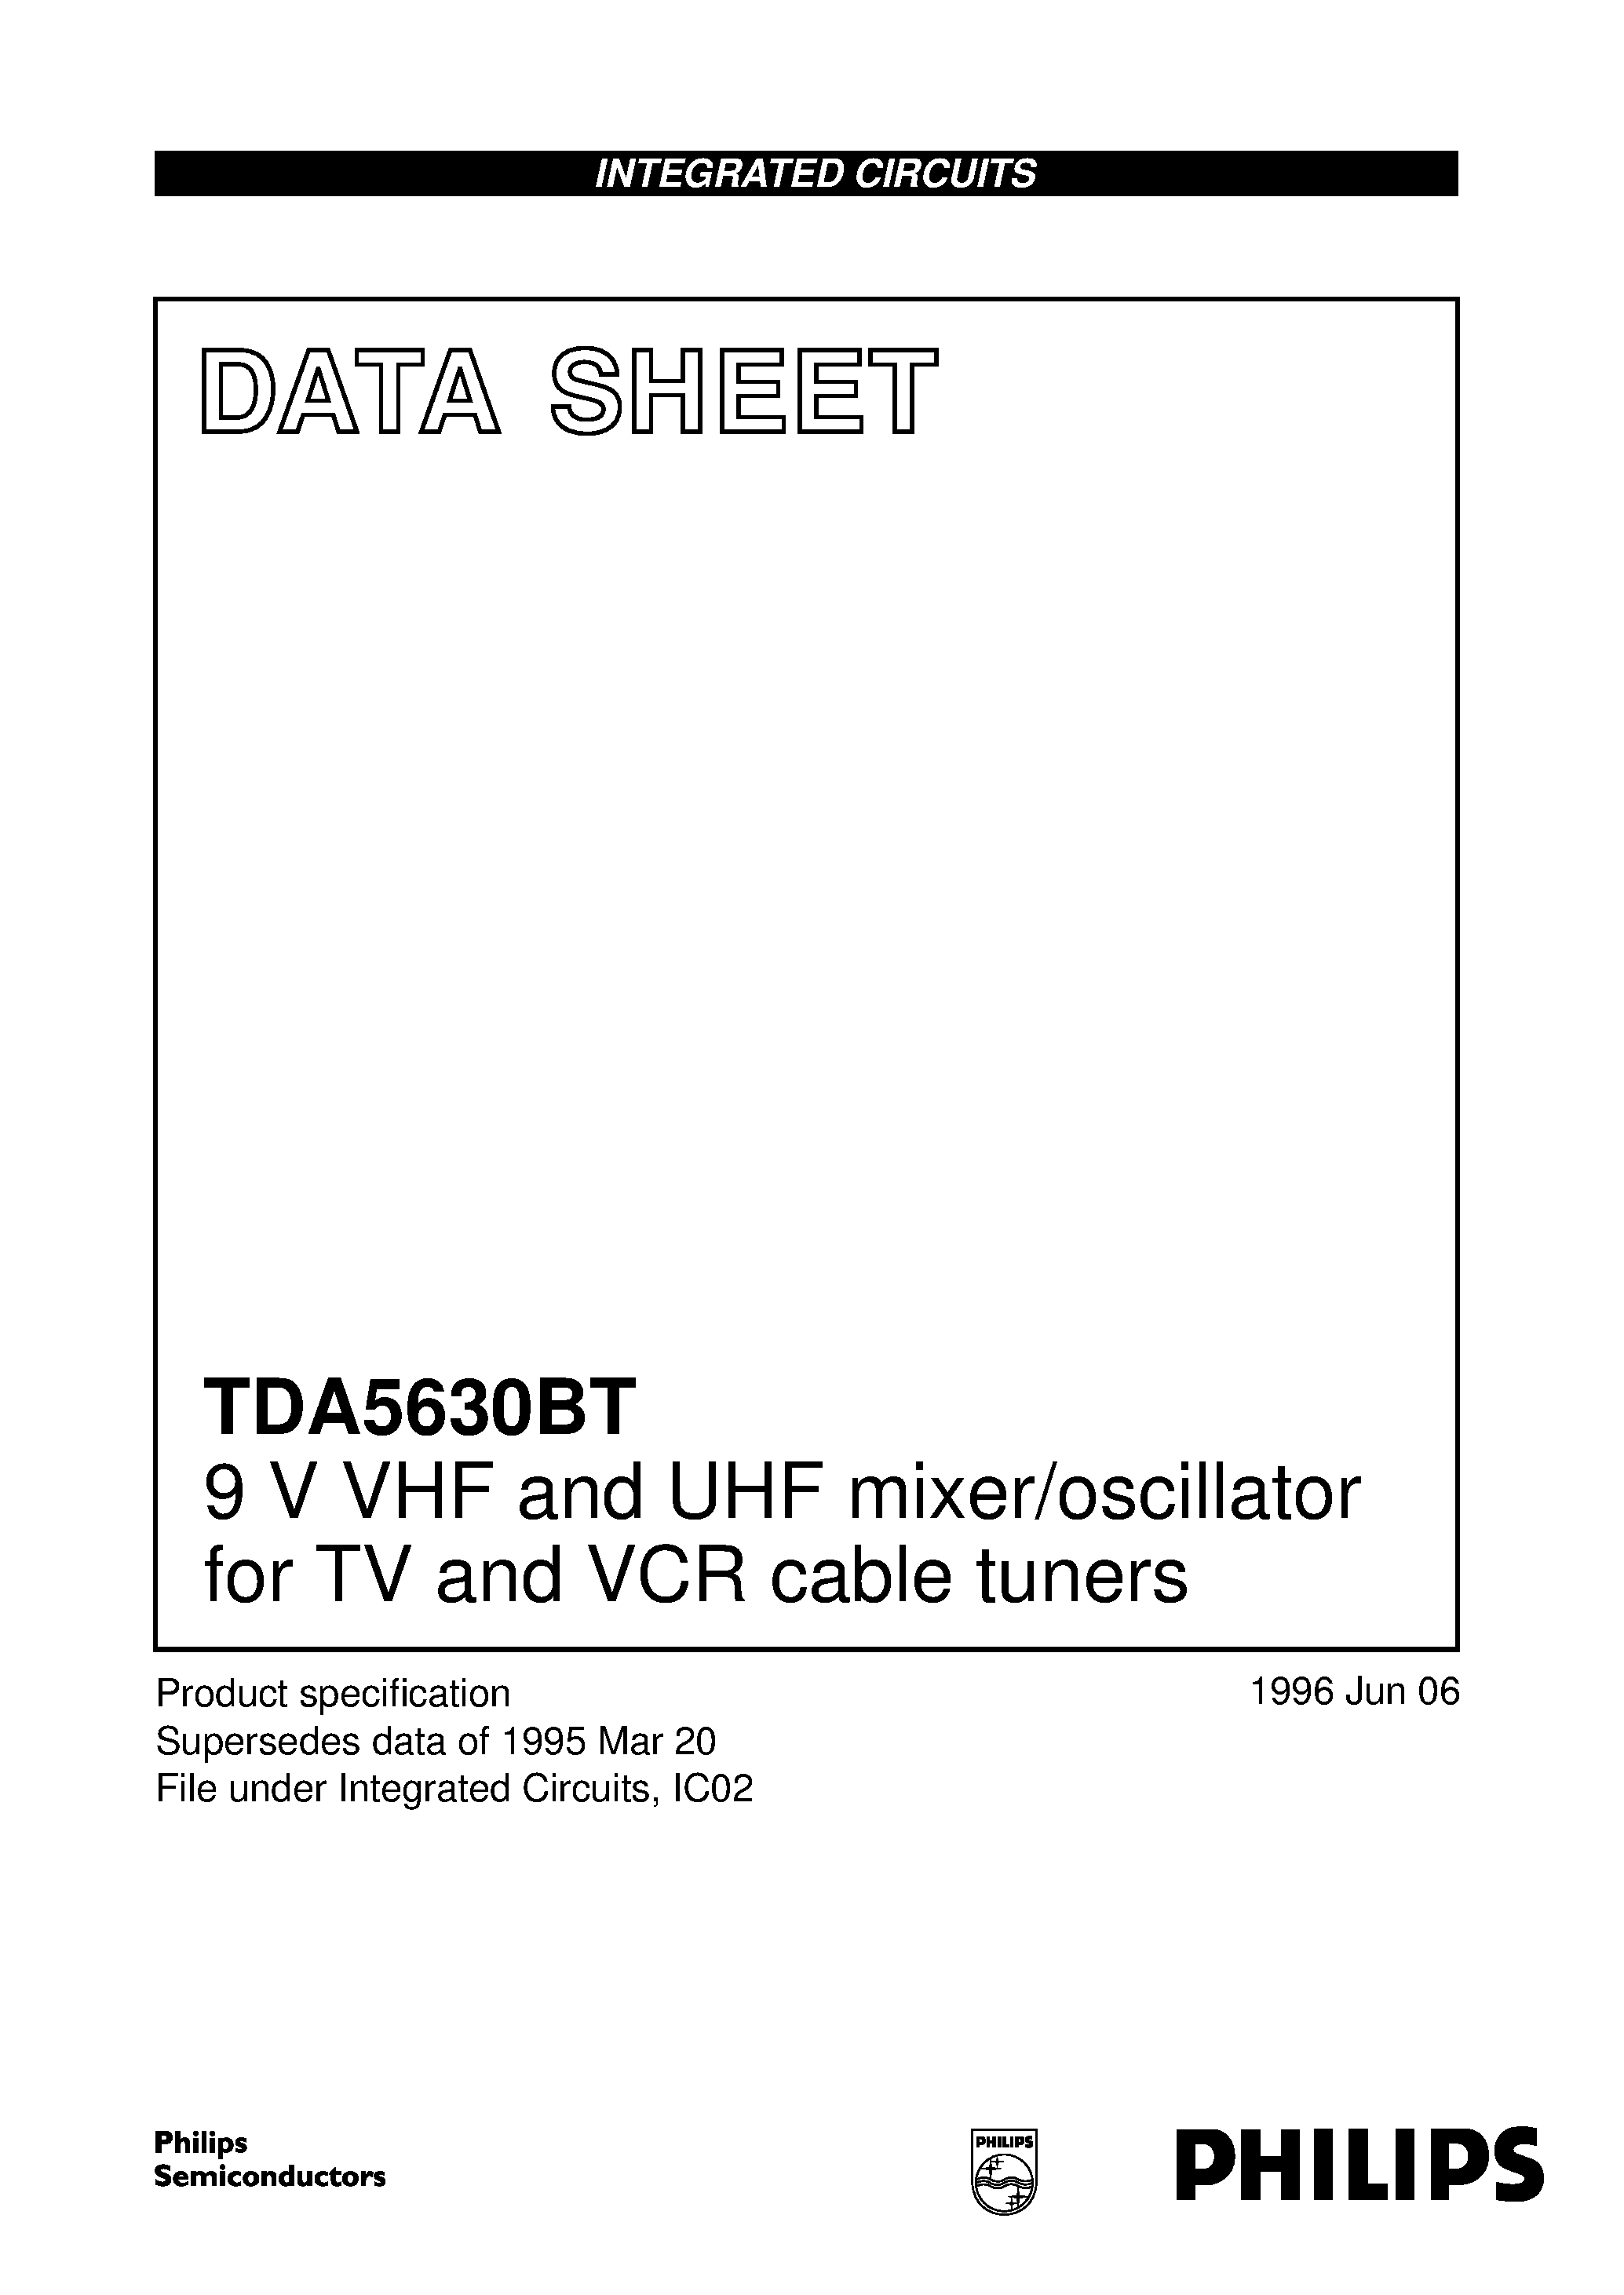 Даташит TDA5630BT - 9 V VHF and UHF mixer/oscillator for TV and VCR cable tuners страница 1